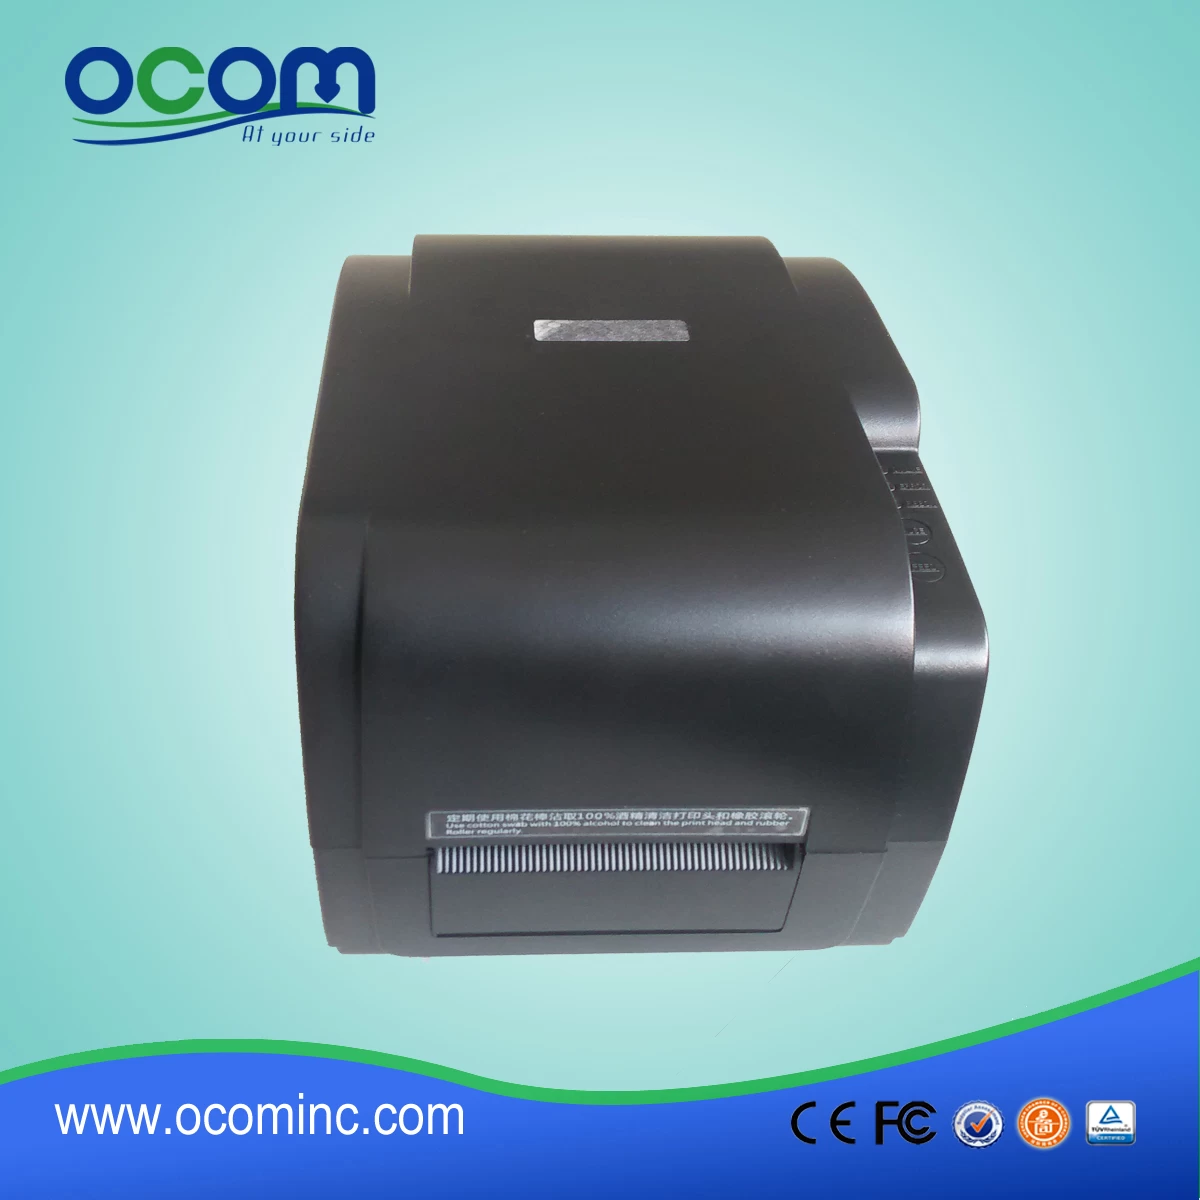 China Wholesale Heat Transfer Label Printers for Stickers